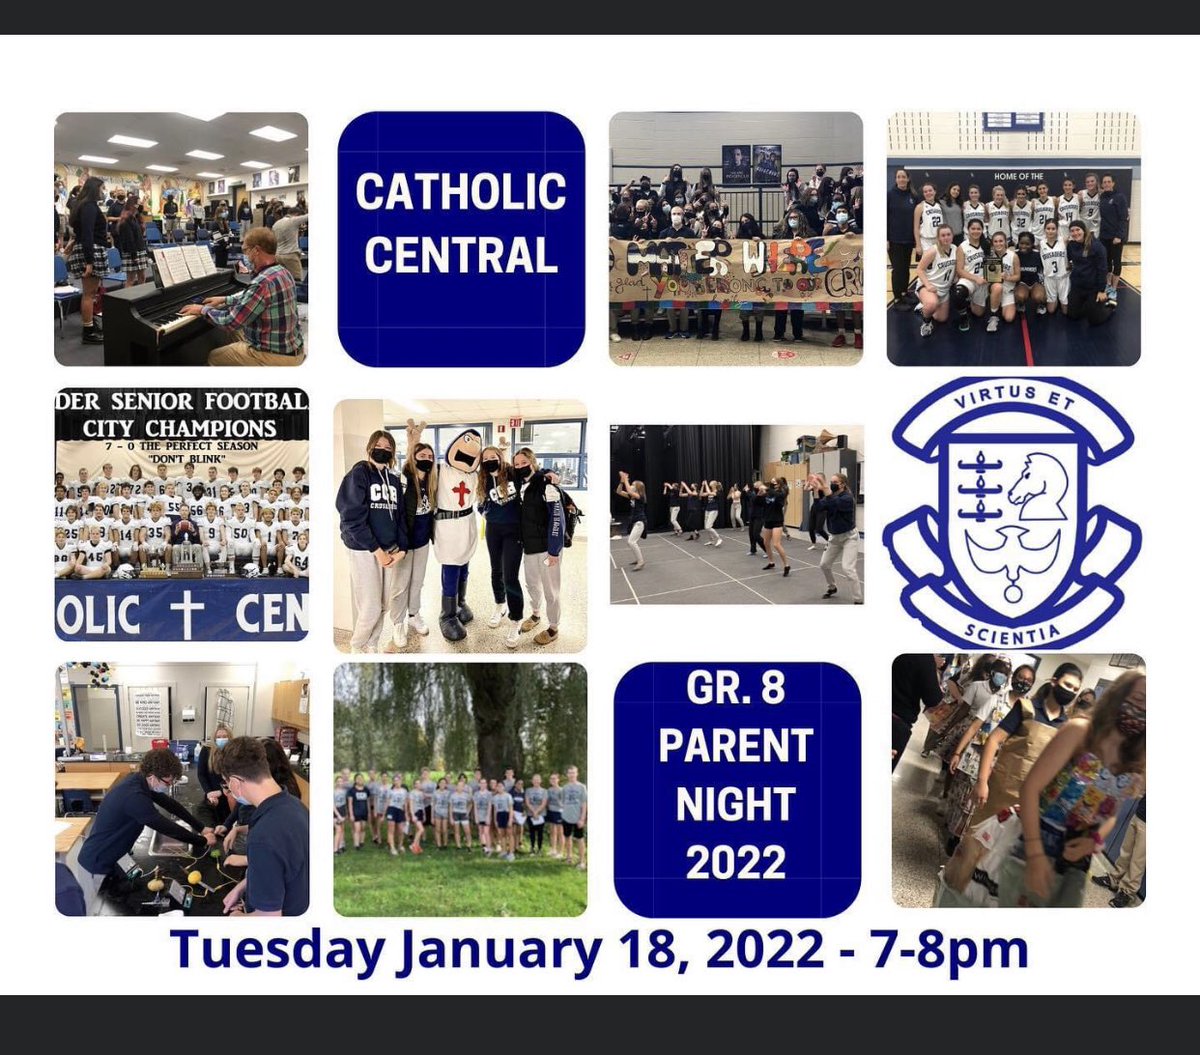 Please join us January 18th to see all that Catholic Central has to offer. We are excited to meet all of our future Crusaders ! cch.ldcsb.ca